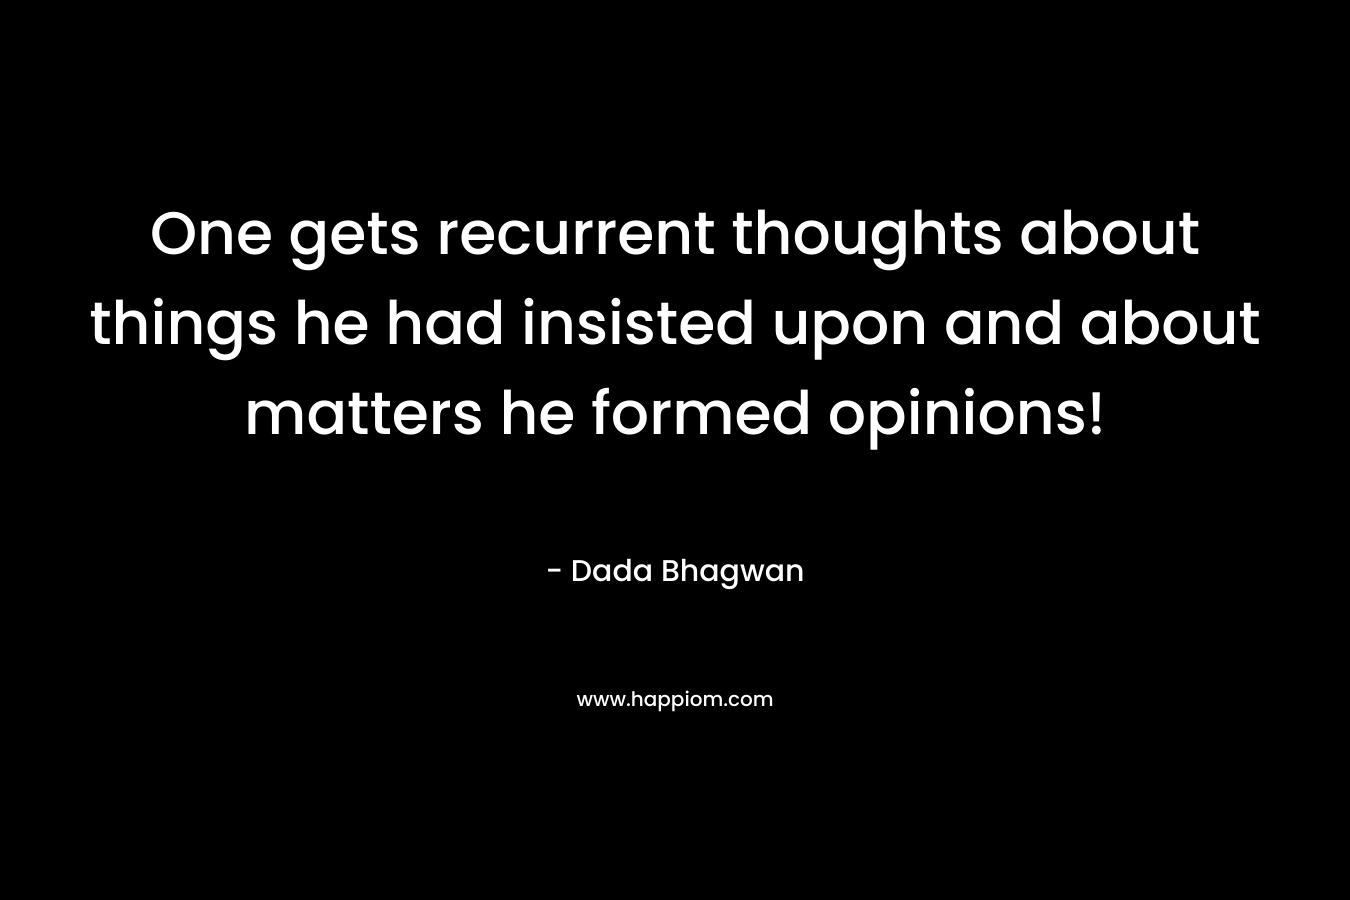 One gets recurrent thoughts about things he had insisted upon and about matters he formed opinions!